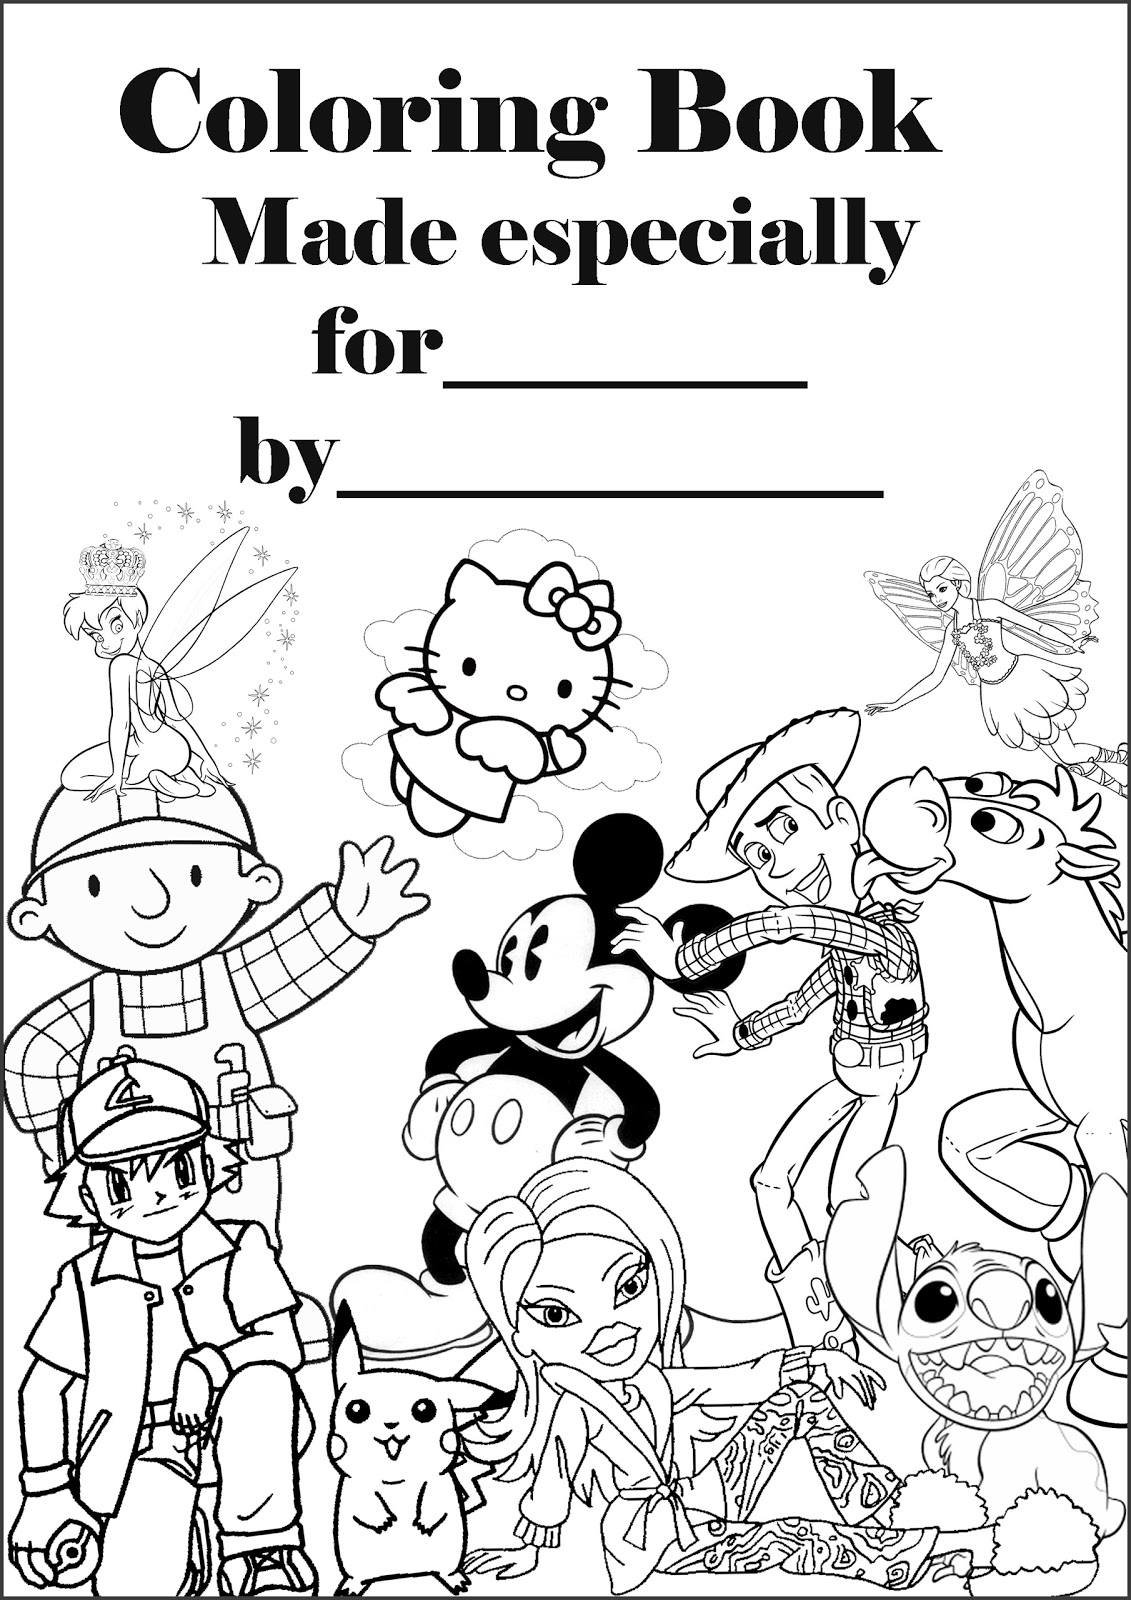 PERSONALISED COLORING BOOK COVER | News On Magazine